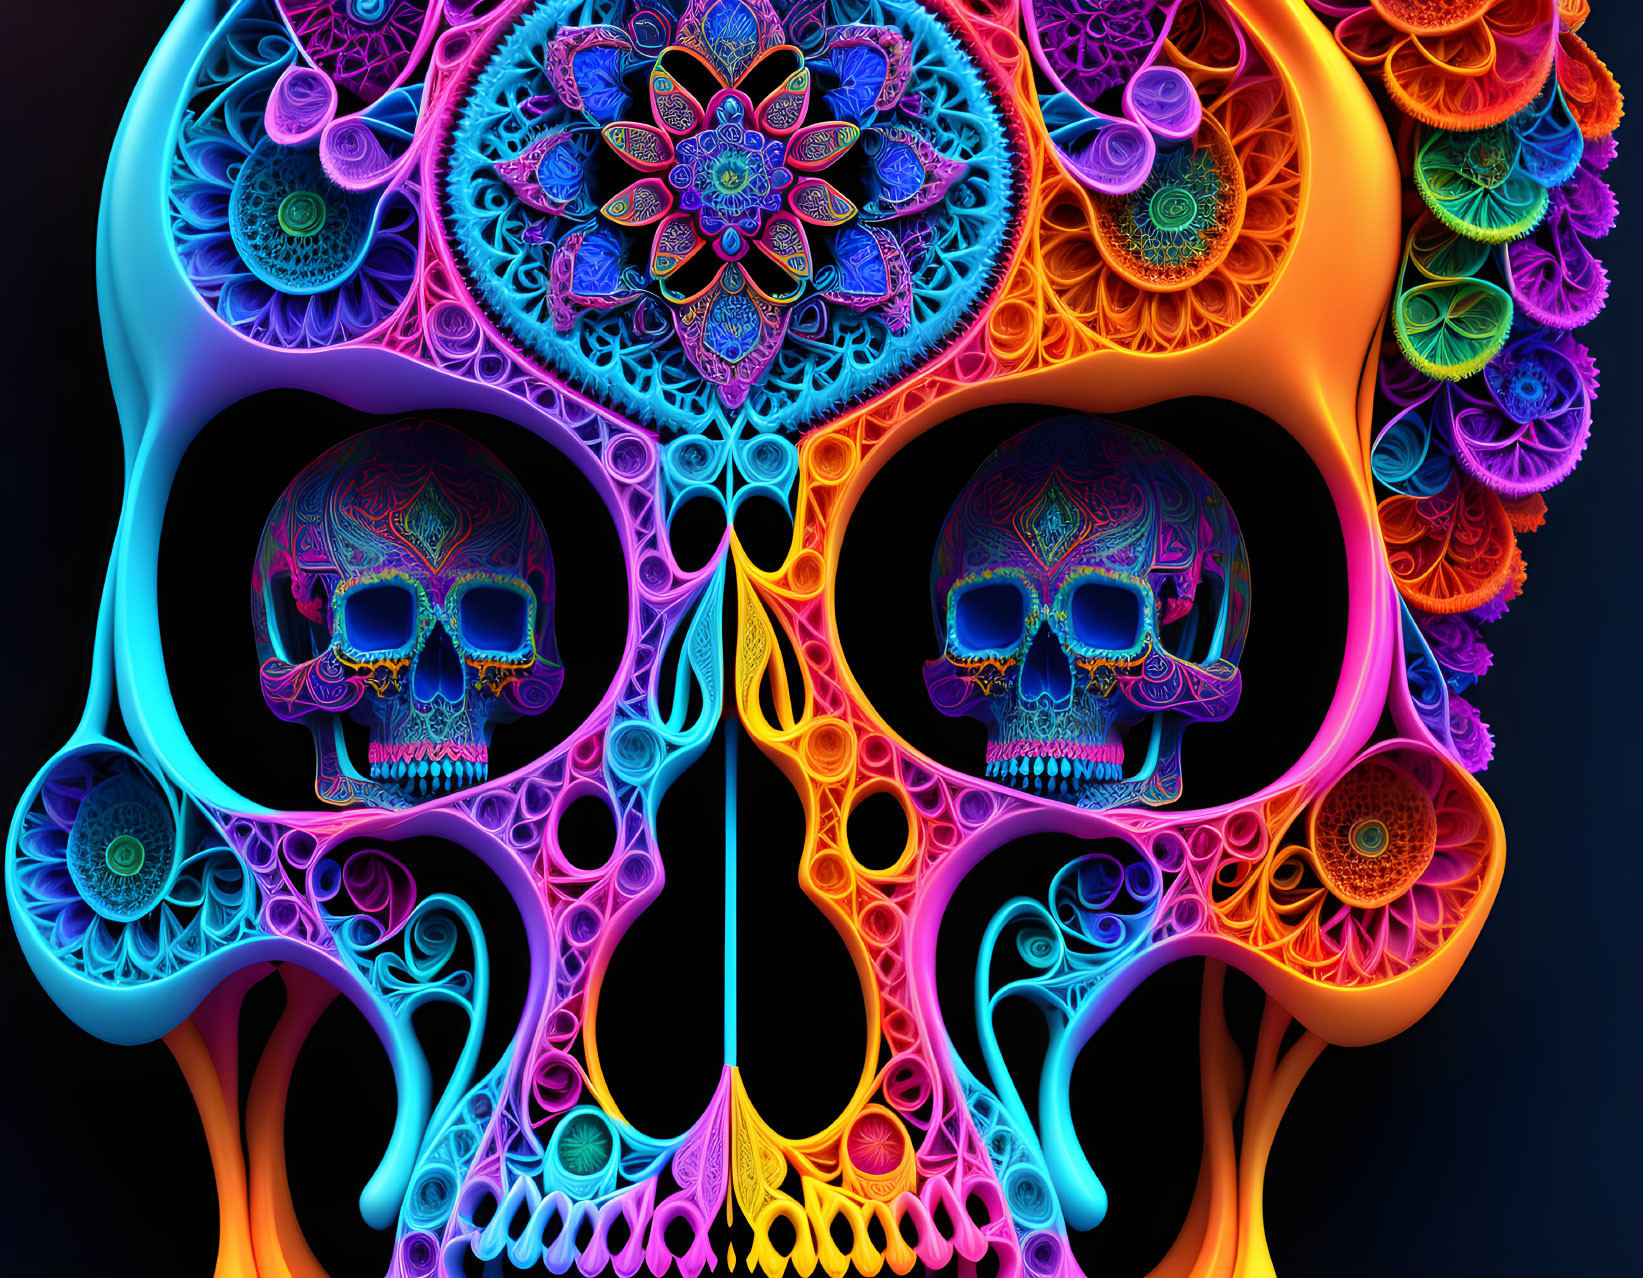 Neon-colored mandala patterns with interconnected skulls on dark background